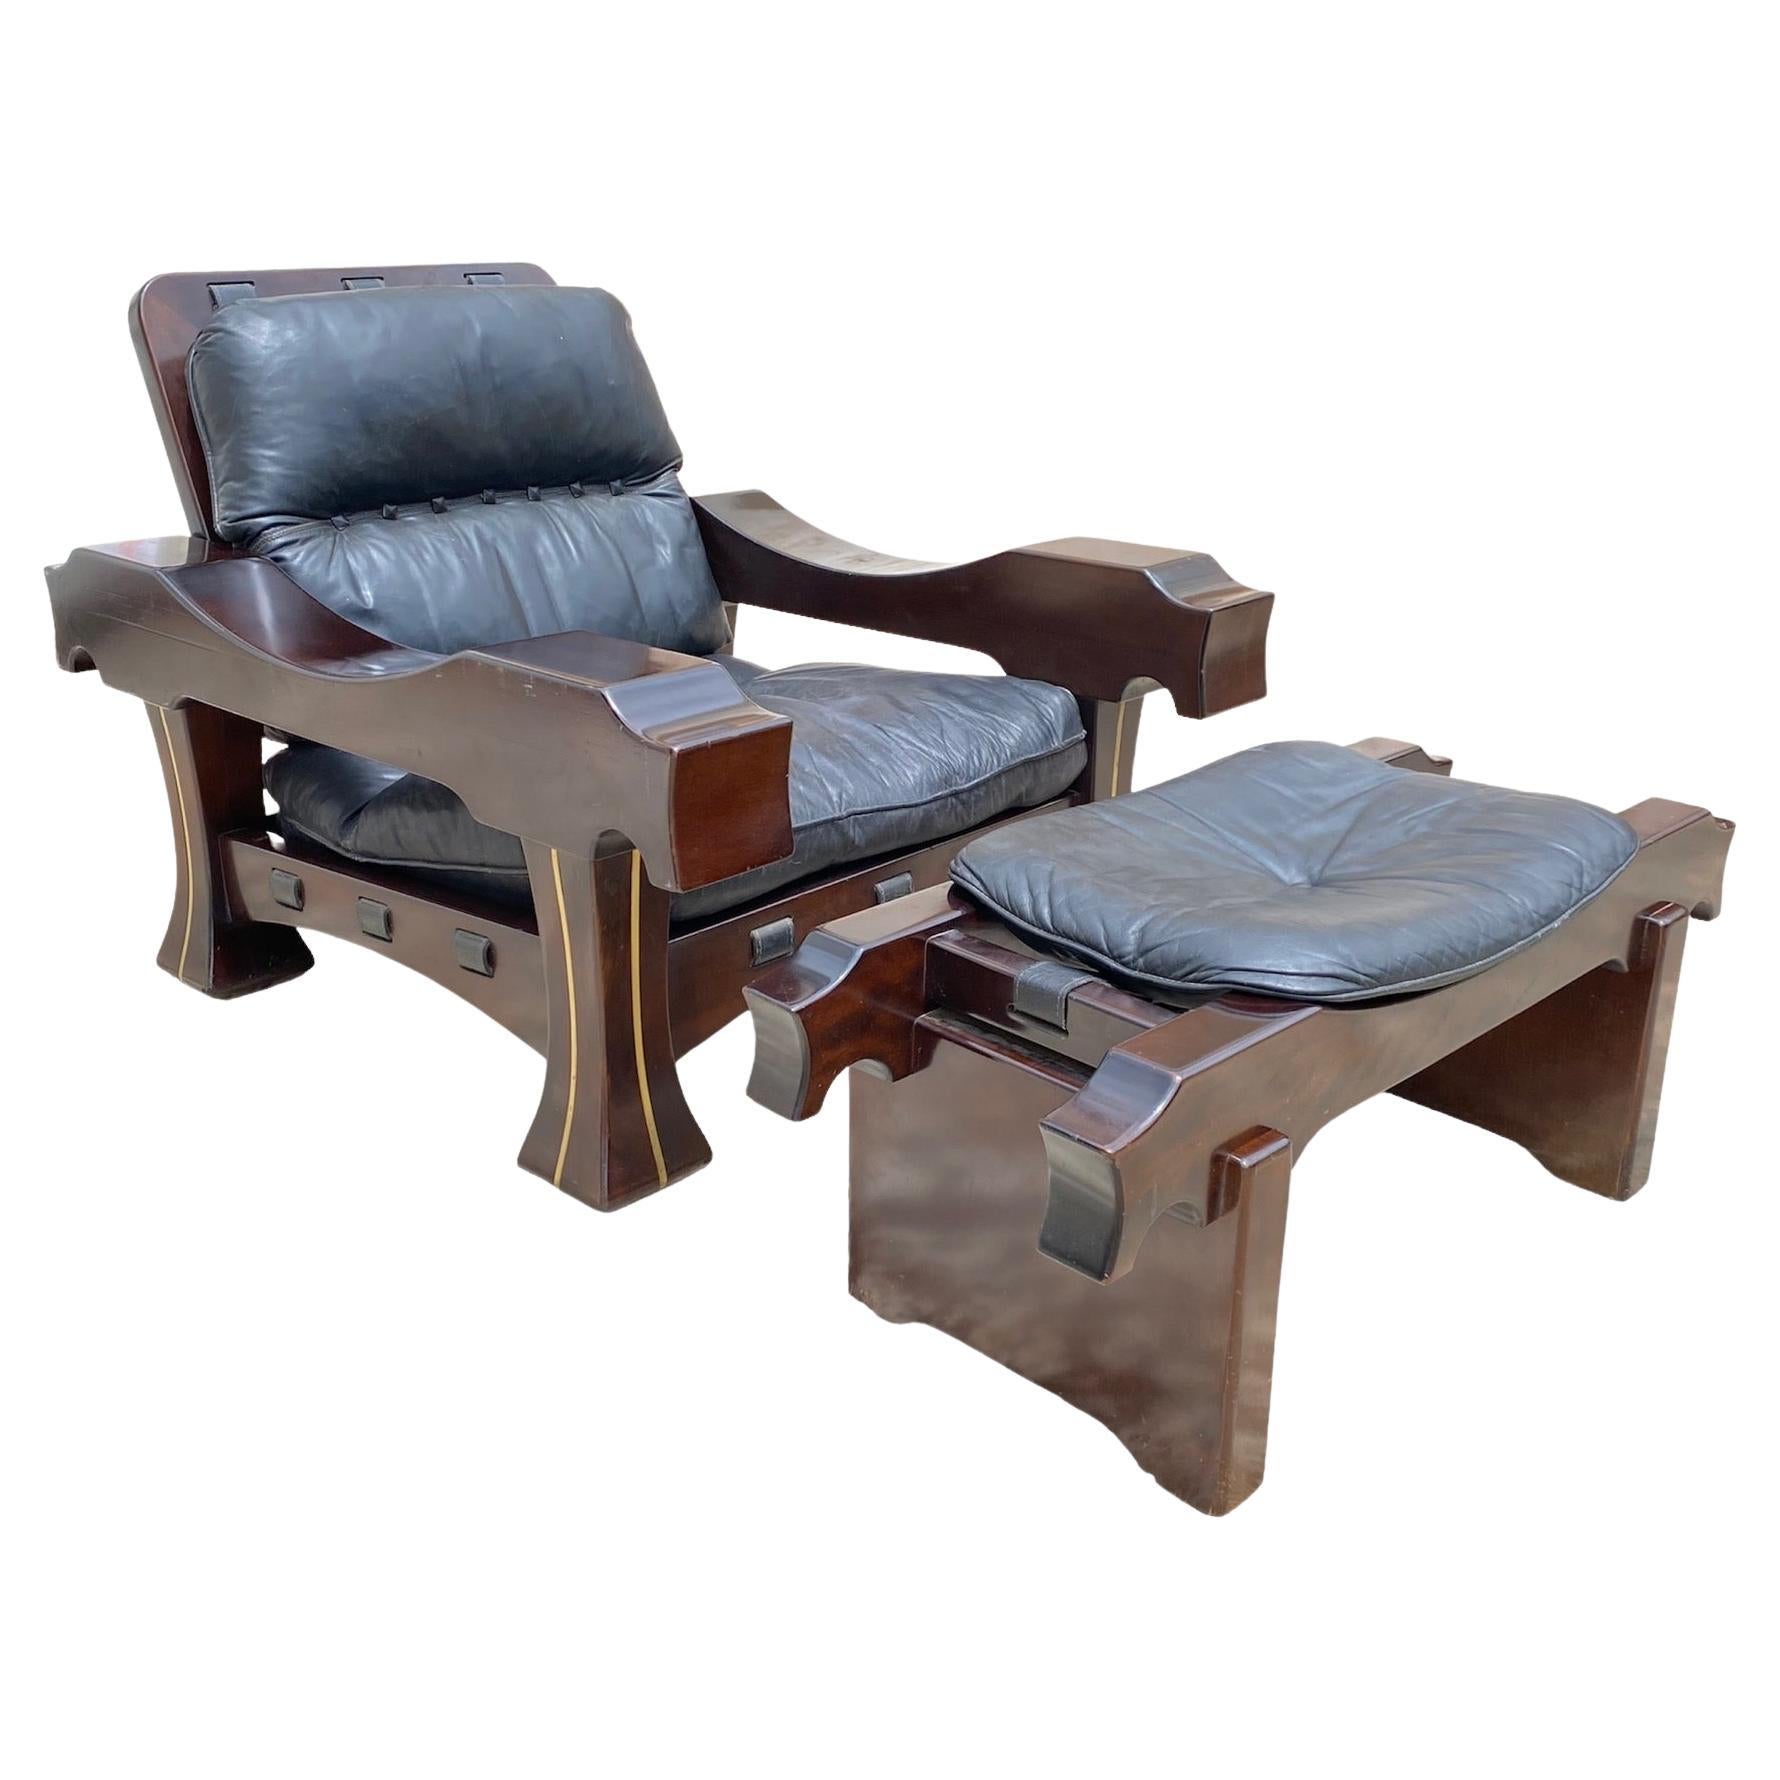 Luciano Frigerio "Ussaro" Armachair and Footrest For Sale